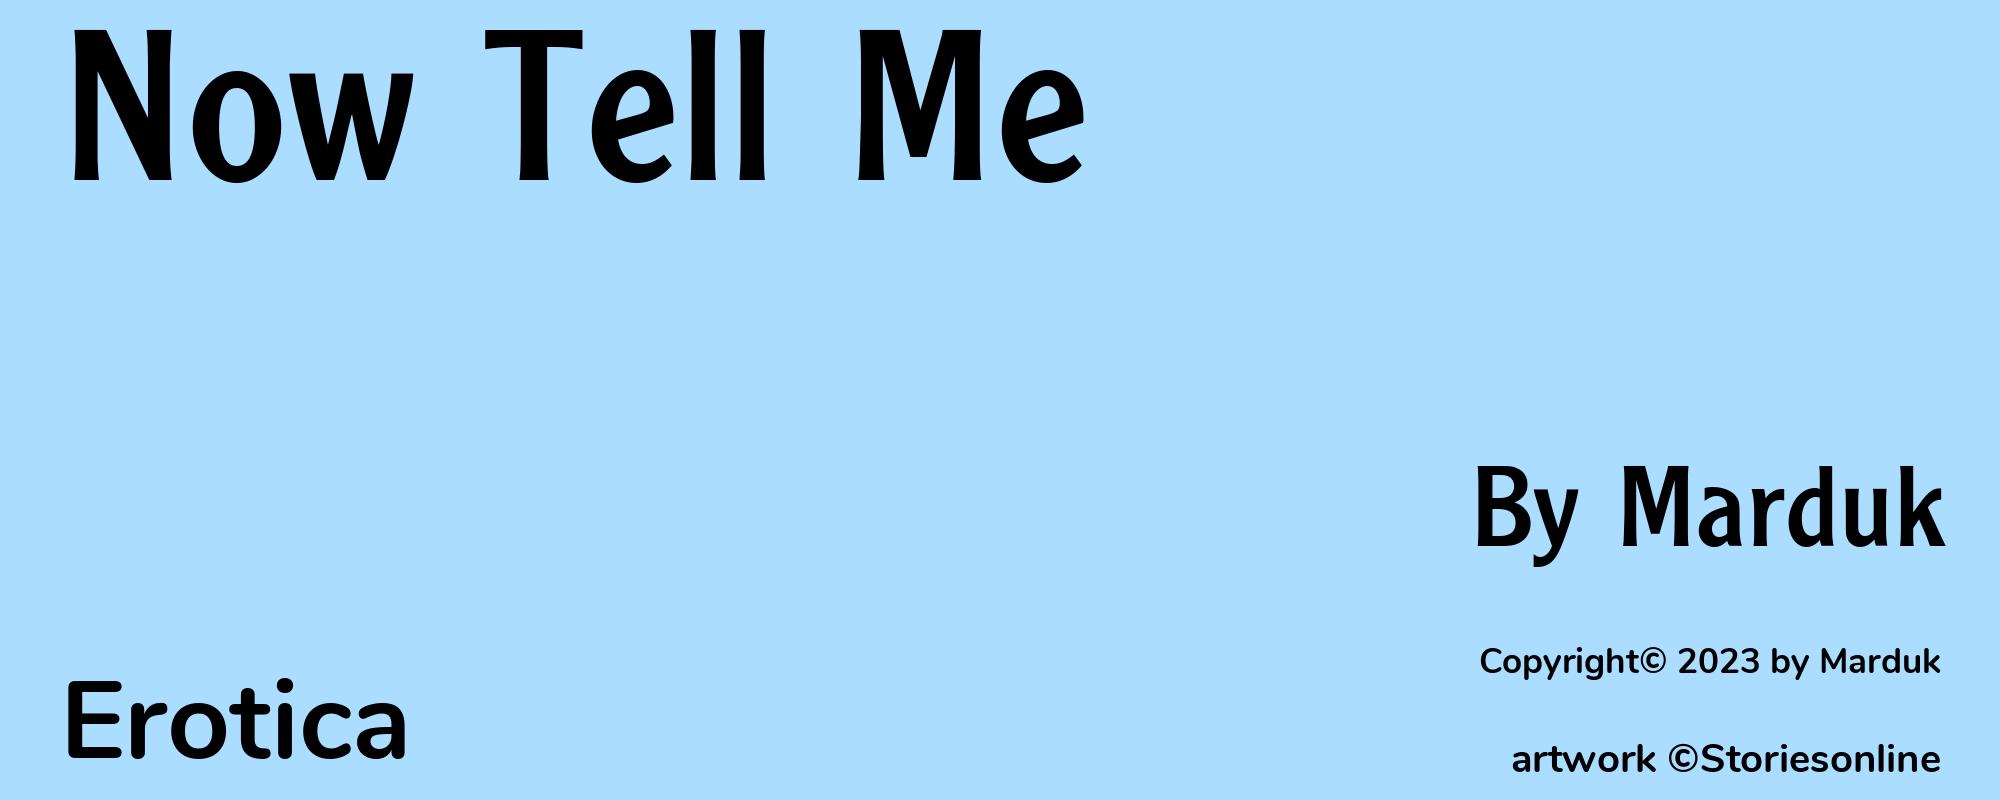 Now Tell Me - Cover